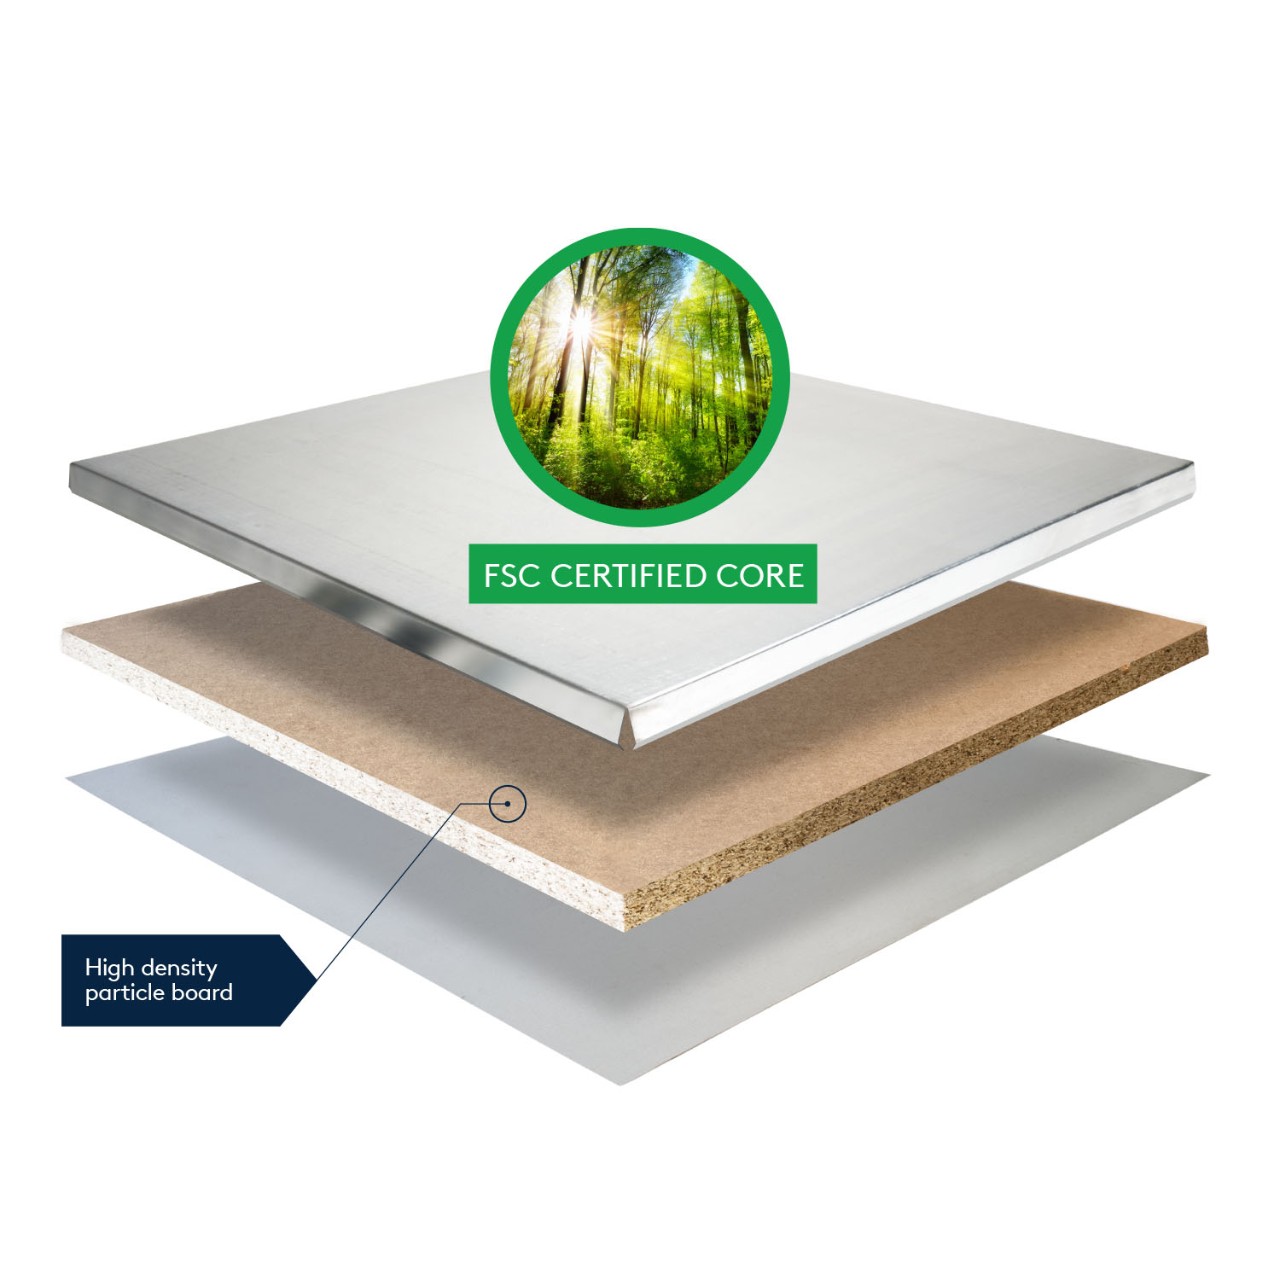 Panel principles: Particleboard